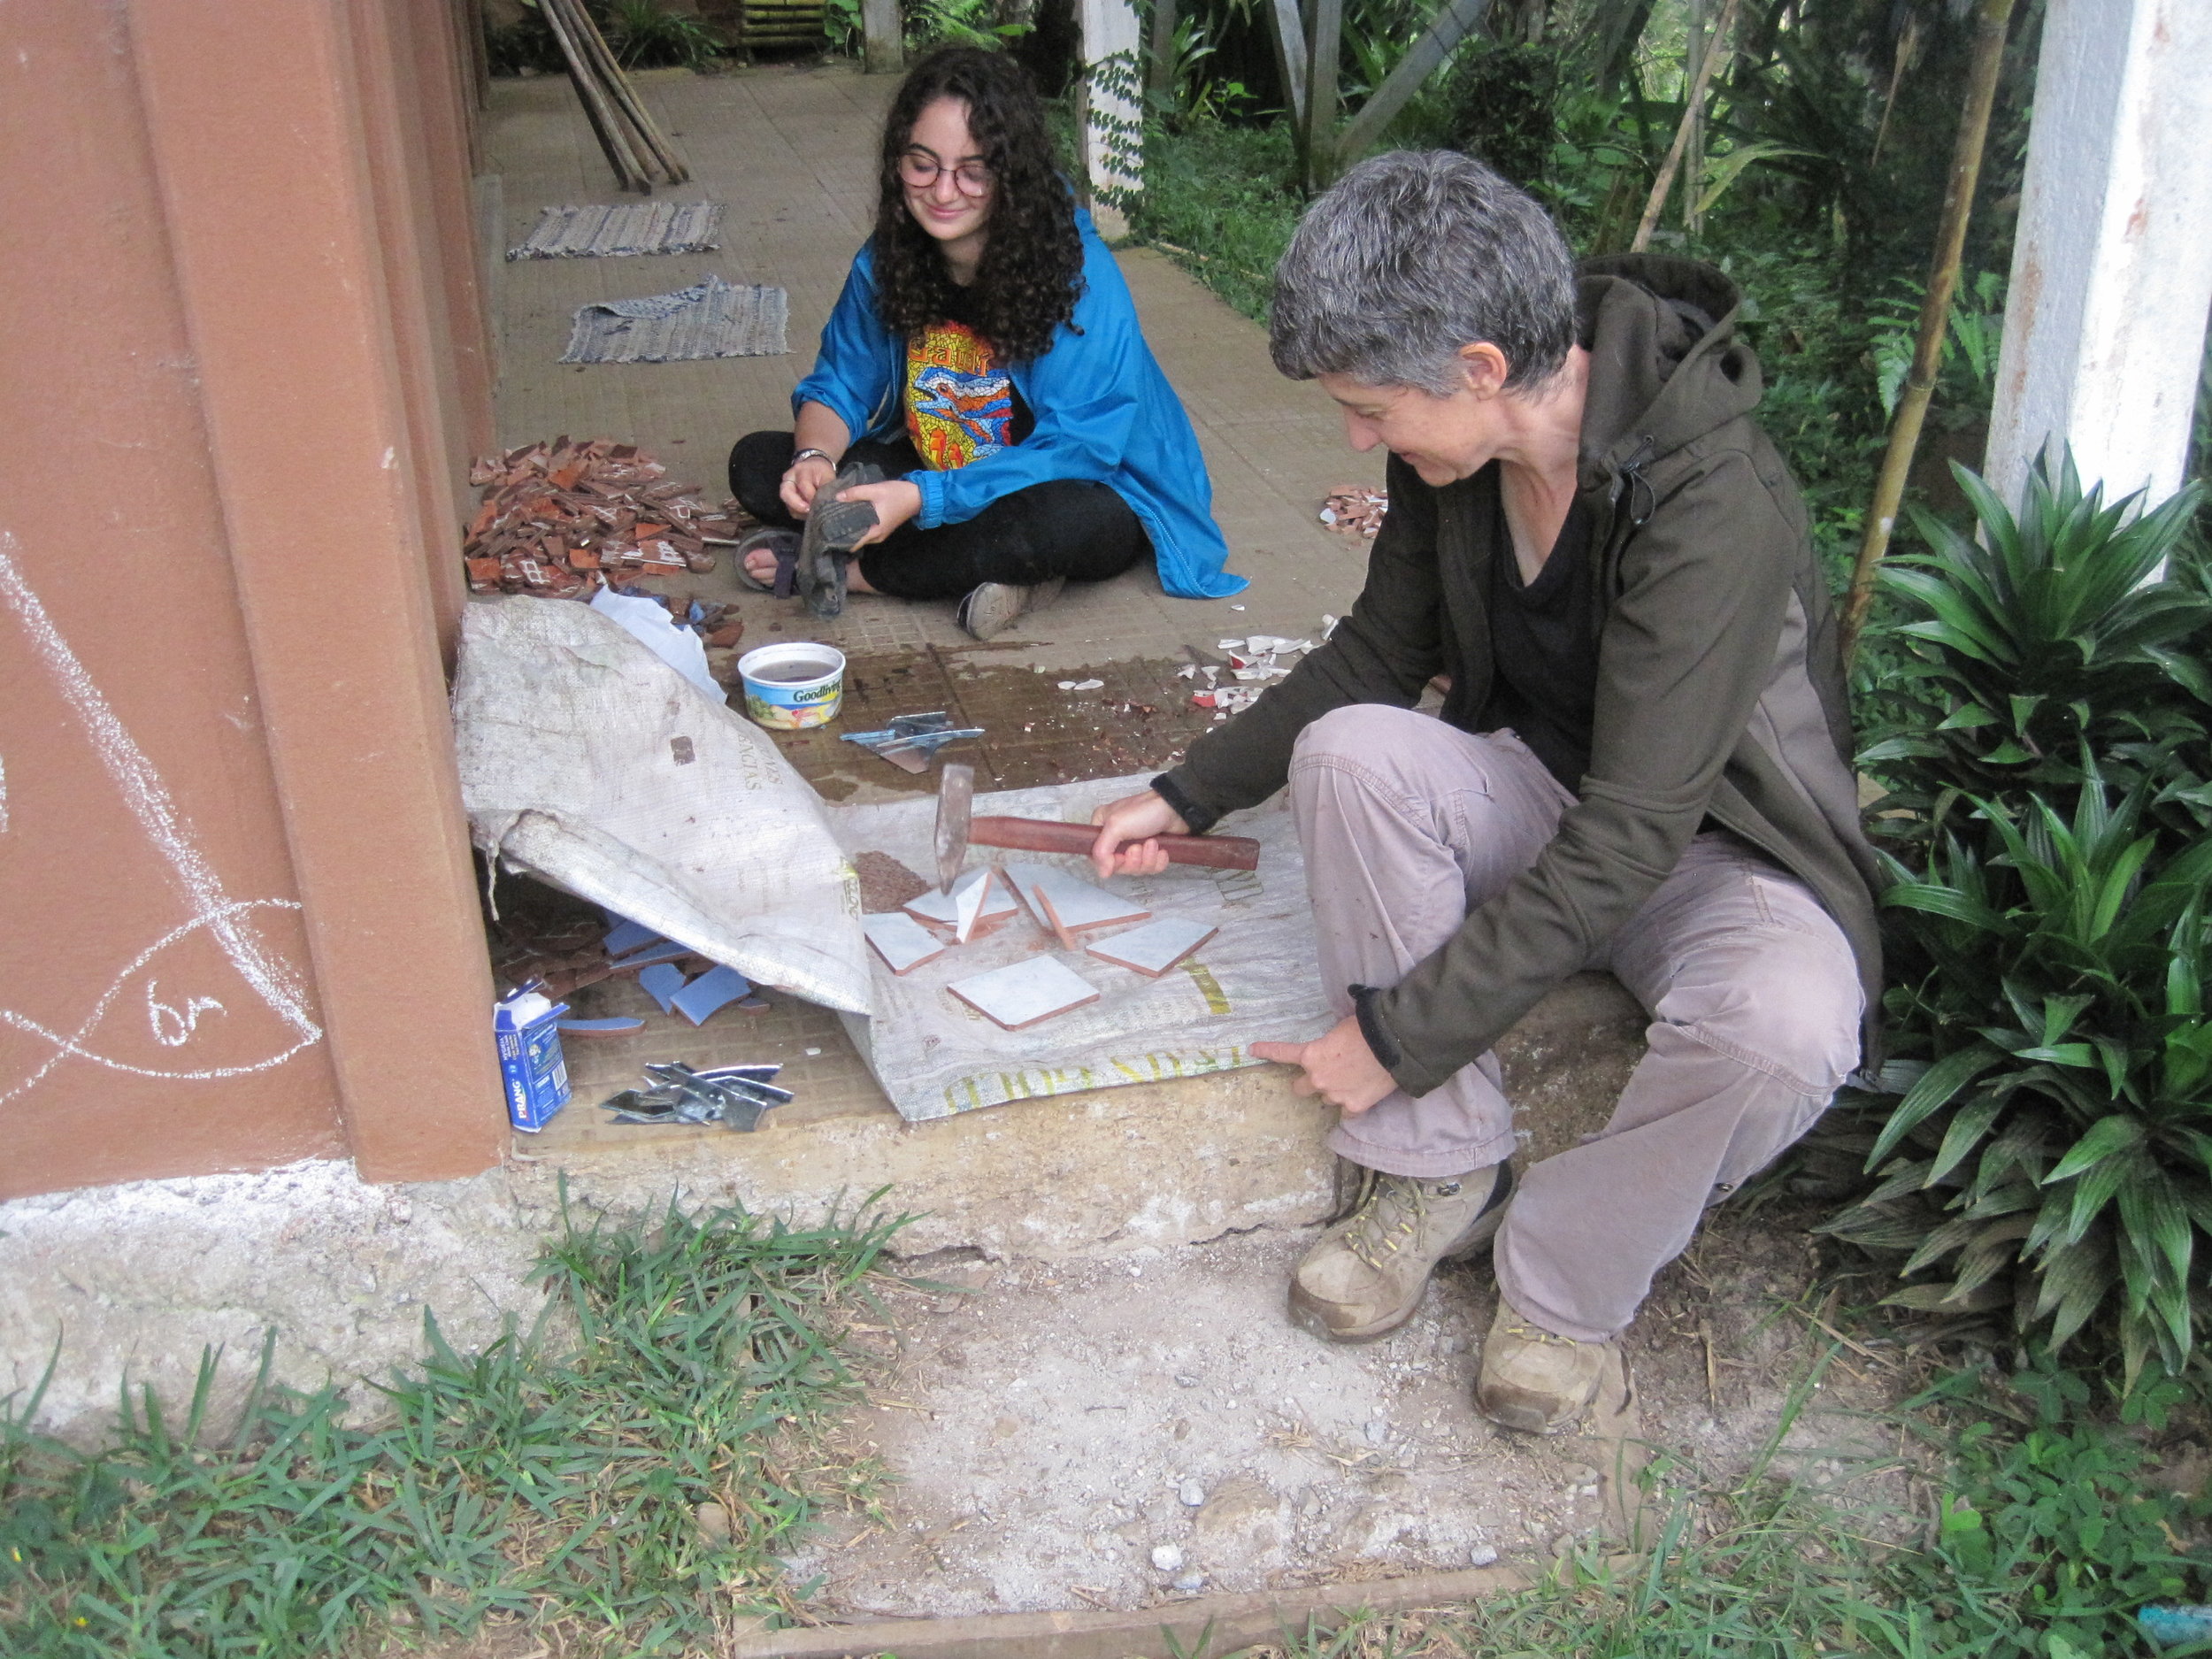  Breaking large tile pieces into smaller tile pieces with the help of Helen, one of my ICDS professors. 